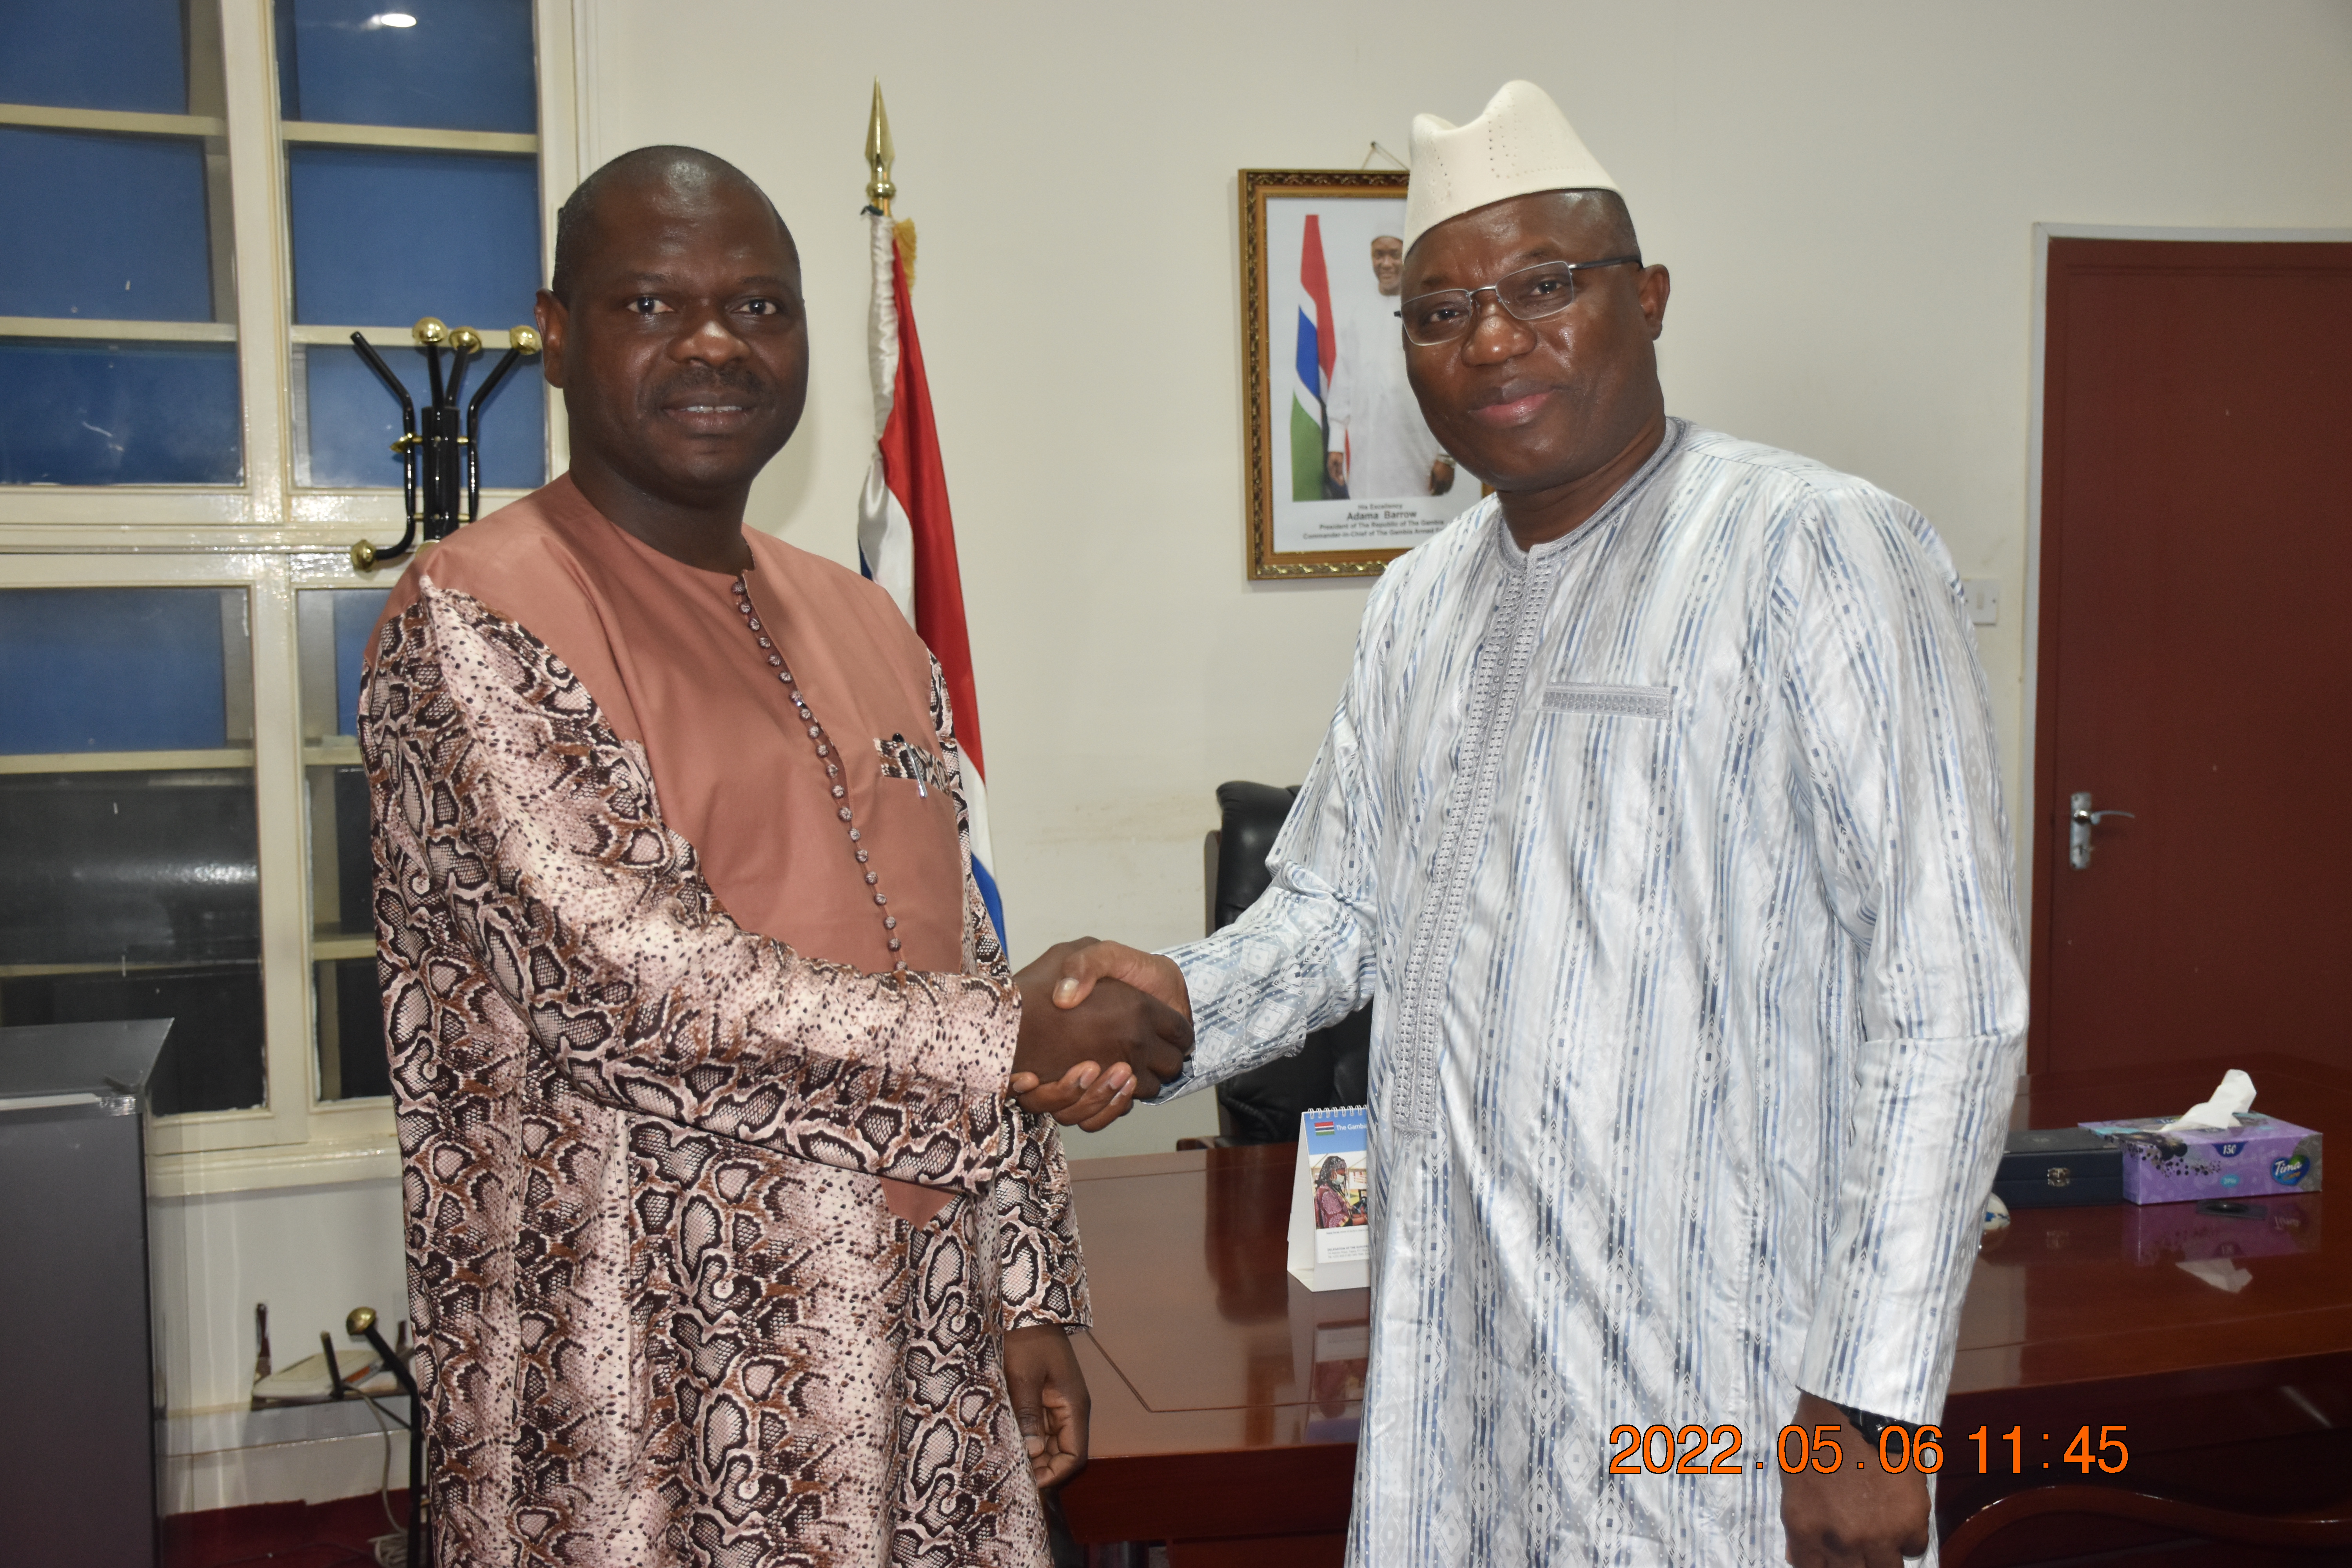 Hon. Seedy Keita replaces Hon. Mambury Njie as the New Minister of Finance and Economic Affairs